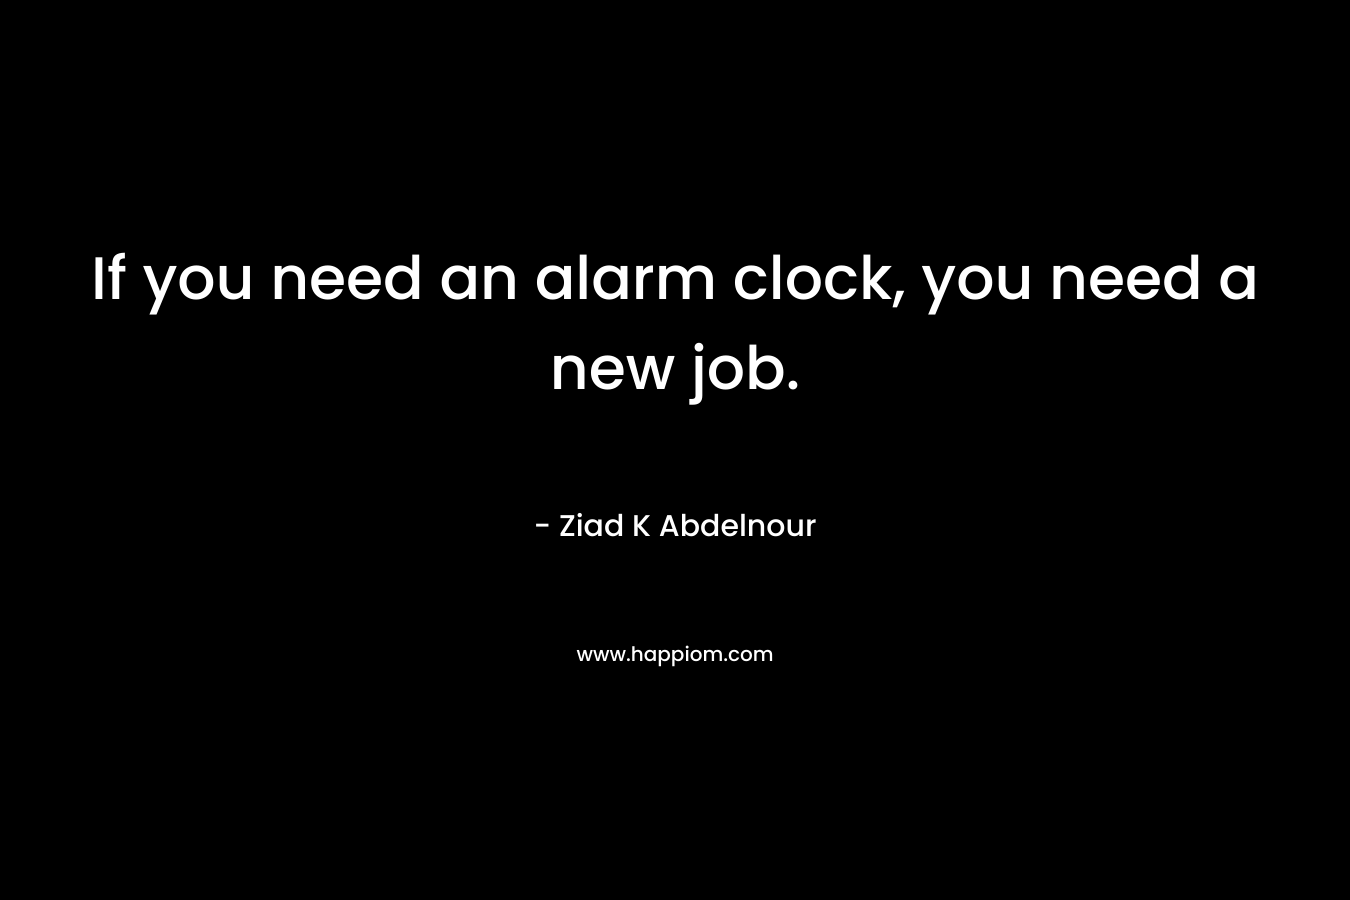 If you need an alarm clock, you need a new job.